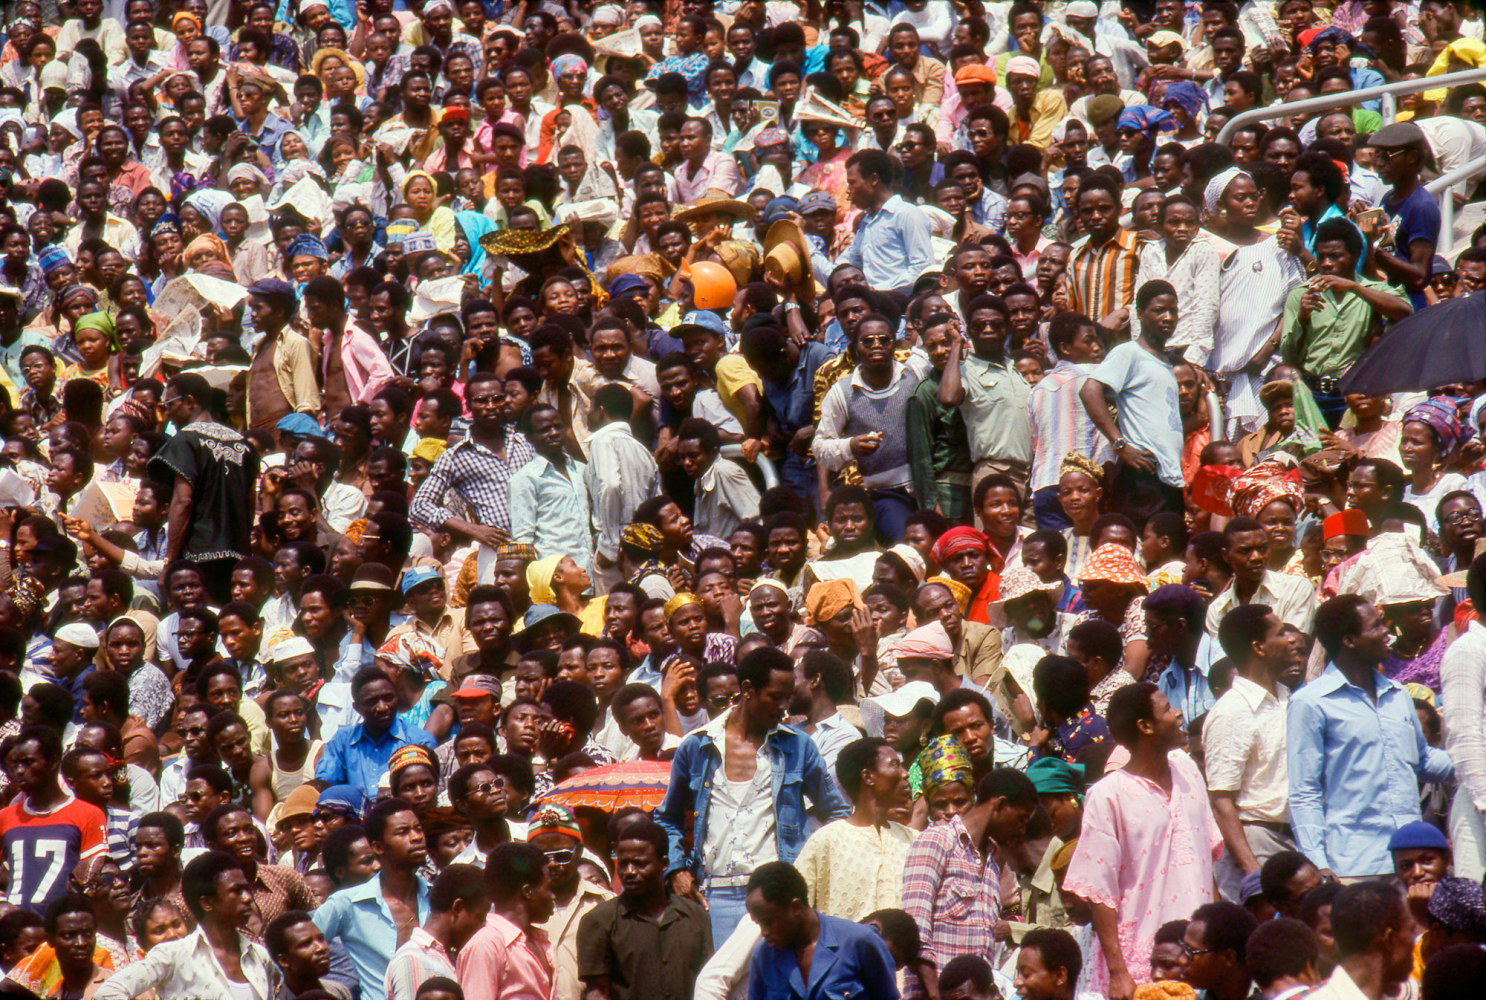 Roy Lewis (b. 1937)
The Crowd at National Stadium on Opening Day of FESTAC, 1977
Archival inkjet print on Simply Elegant Gold Fibre paper
Image: 13 3/4 x 20 inches (34.9 x 50.8 cm) Sheet: 17 x 22 inches (43.2 x 55.9 cm)
Framed: 18 5/8 &amp;times; 25 3/8 &amp;times; 1 1/2 inches (47.3 &amp;times; 64.5 &amp;times; 3.8 cm)
Edition of 5, printed 2023